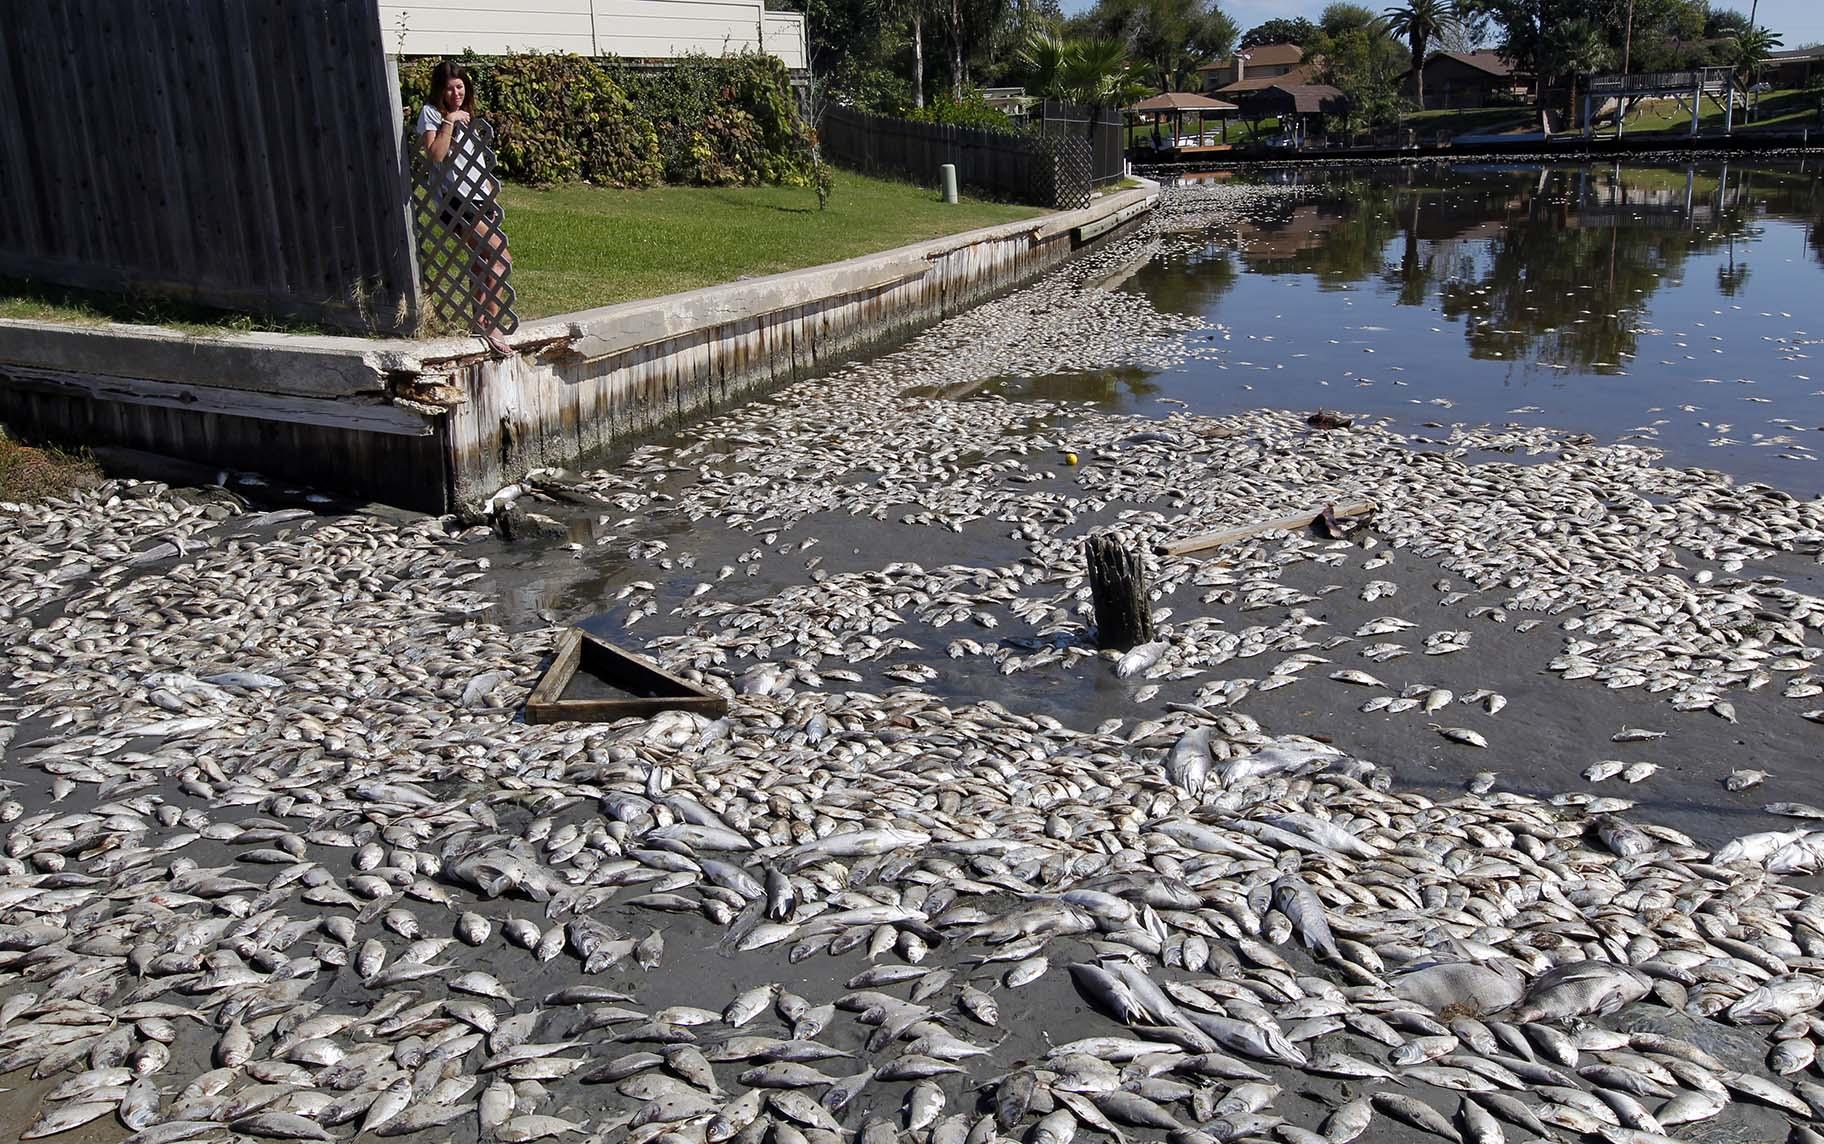 In this Tuesday, Oct. 30, 2012, file photo, Kim Bertini looks over some of the 15,000 dead fish that washed up near her backyard on Lake Madeline in Galveston, Texas. (Jennifer Reynolds / The Galveston County Daily News via AP, File)